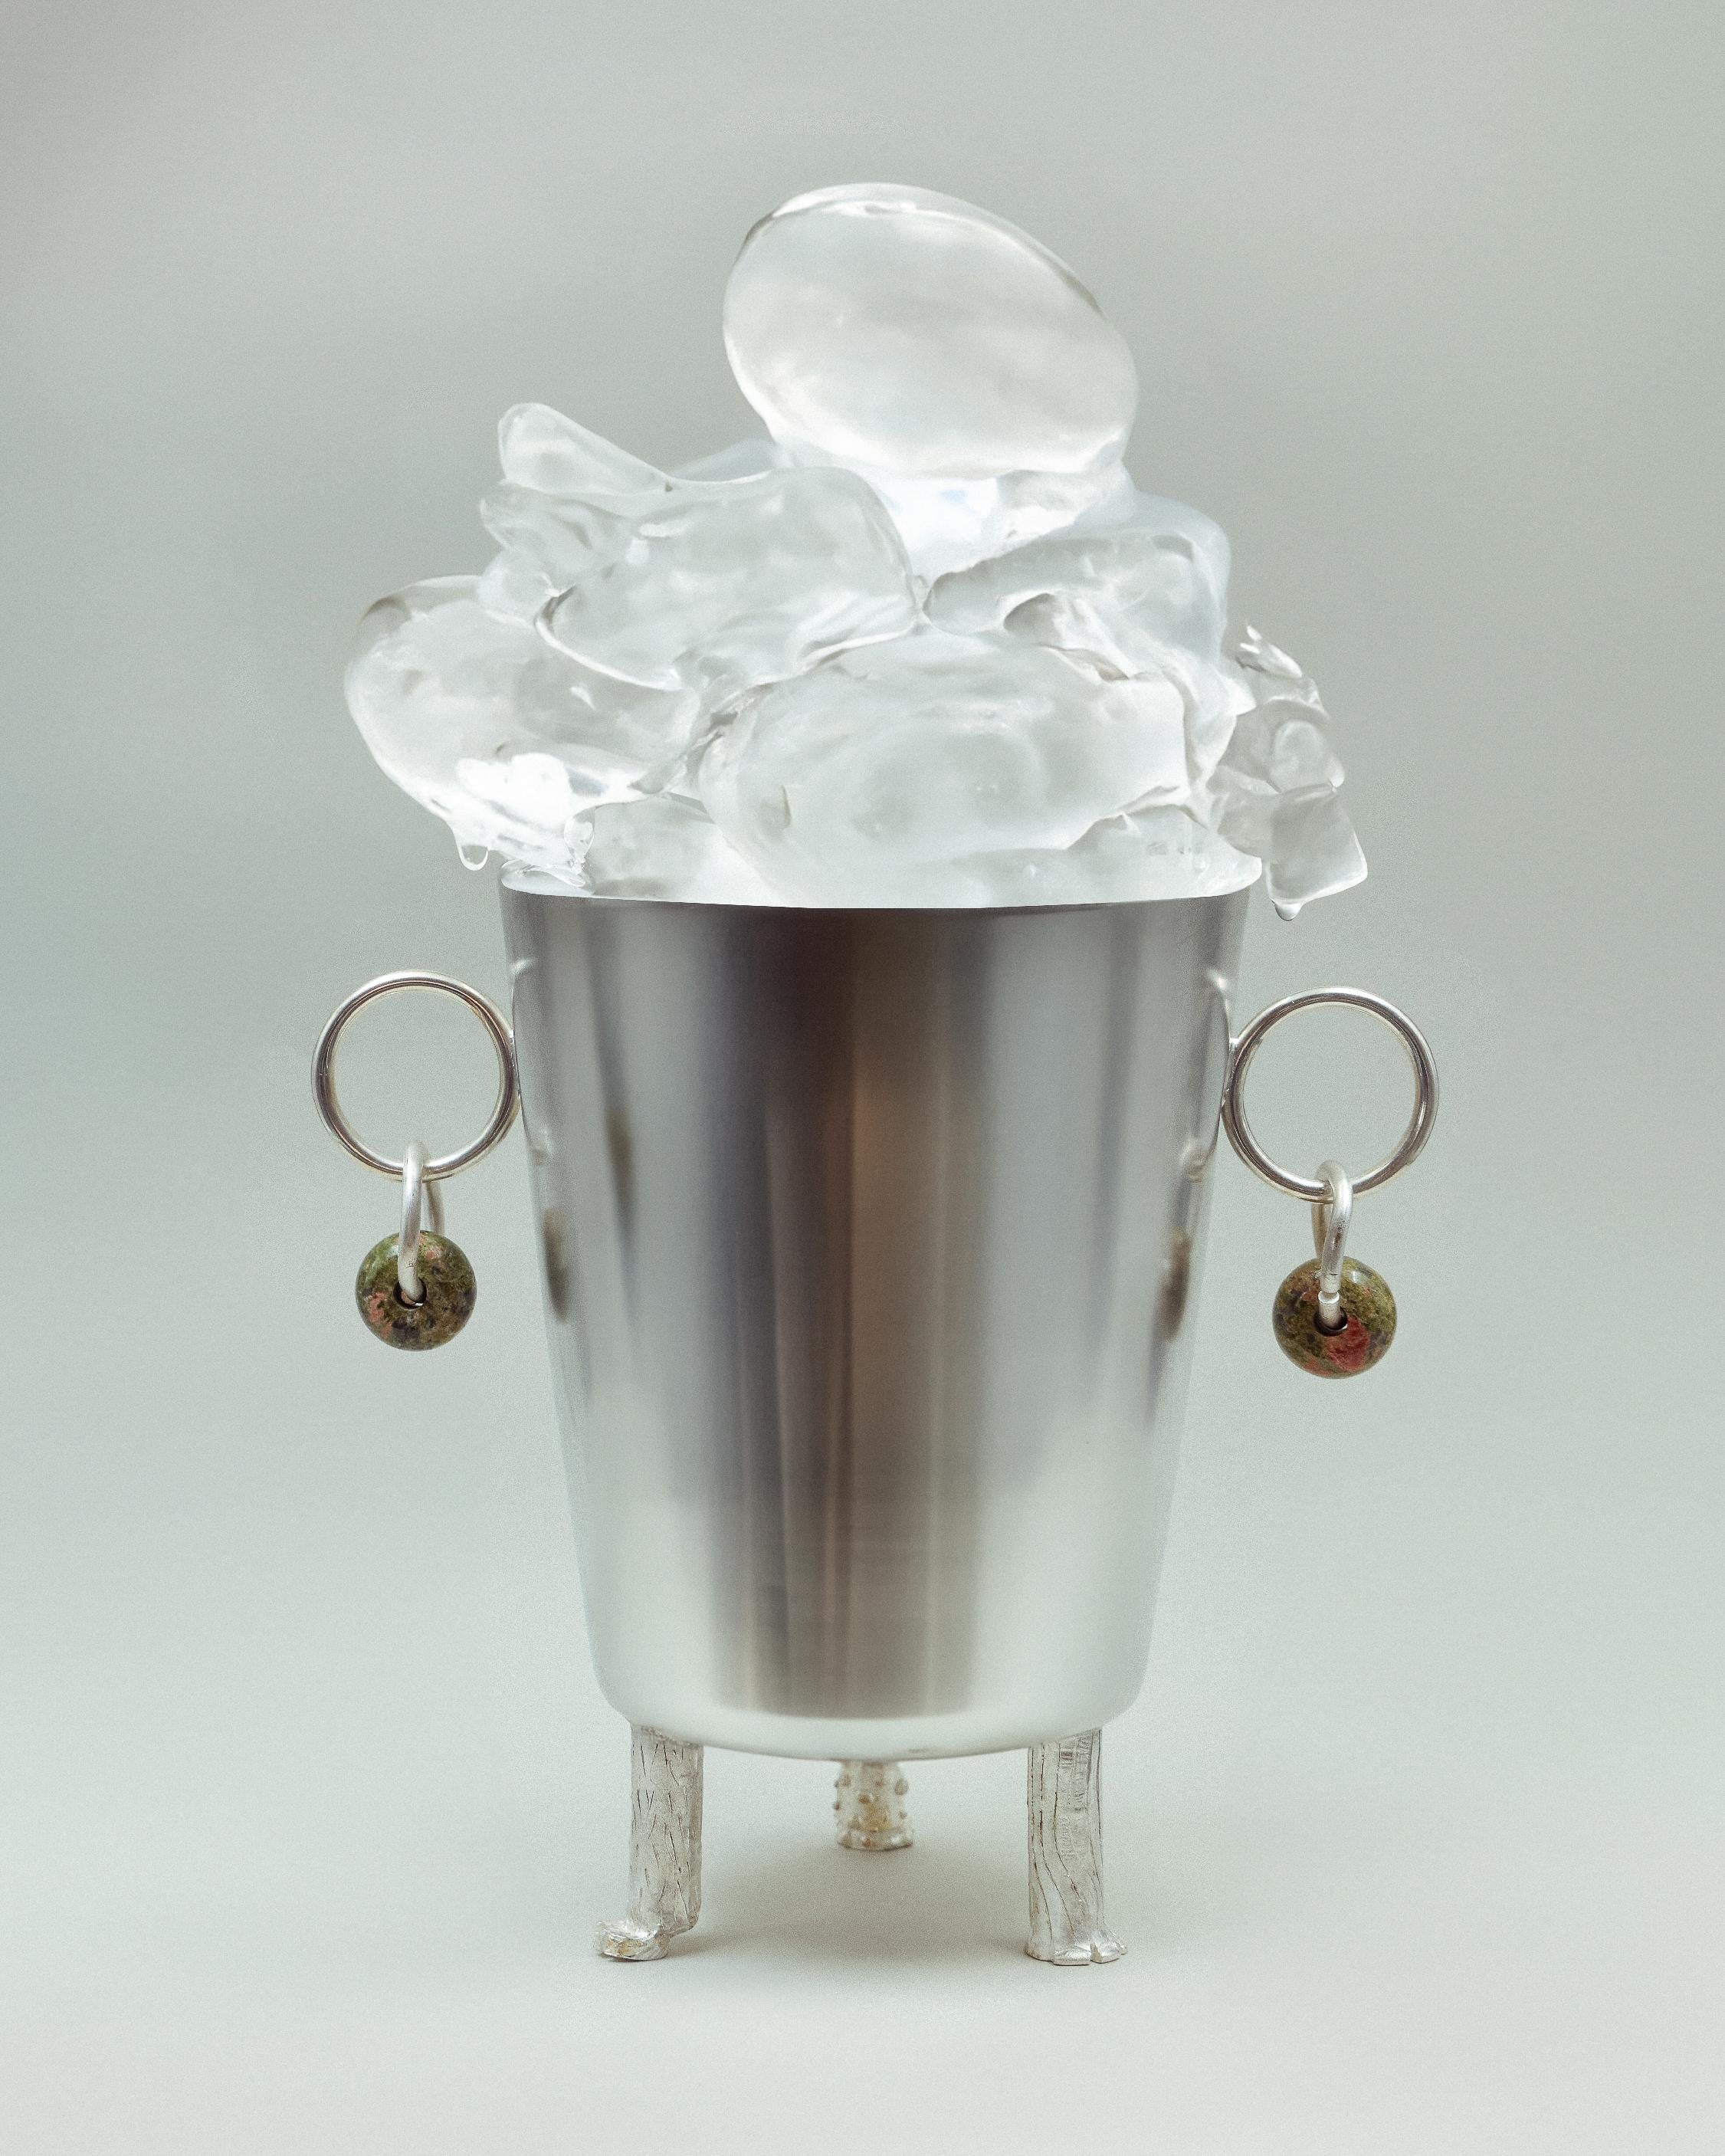 Modern Contemporary Silver Plated Ice Bucket Sculptural Feet Carved by Natalia Criado For Sale